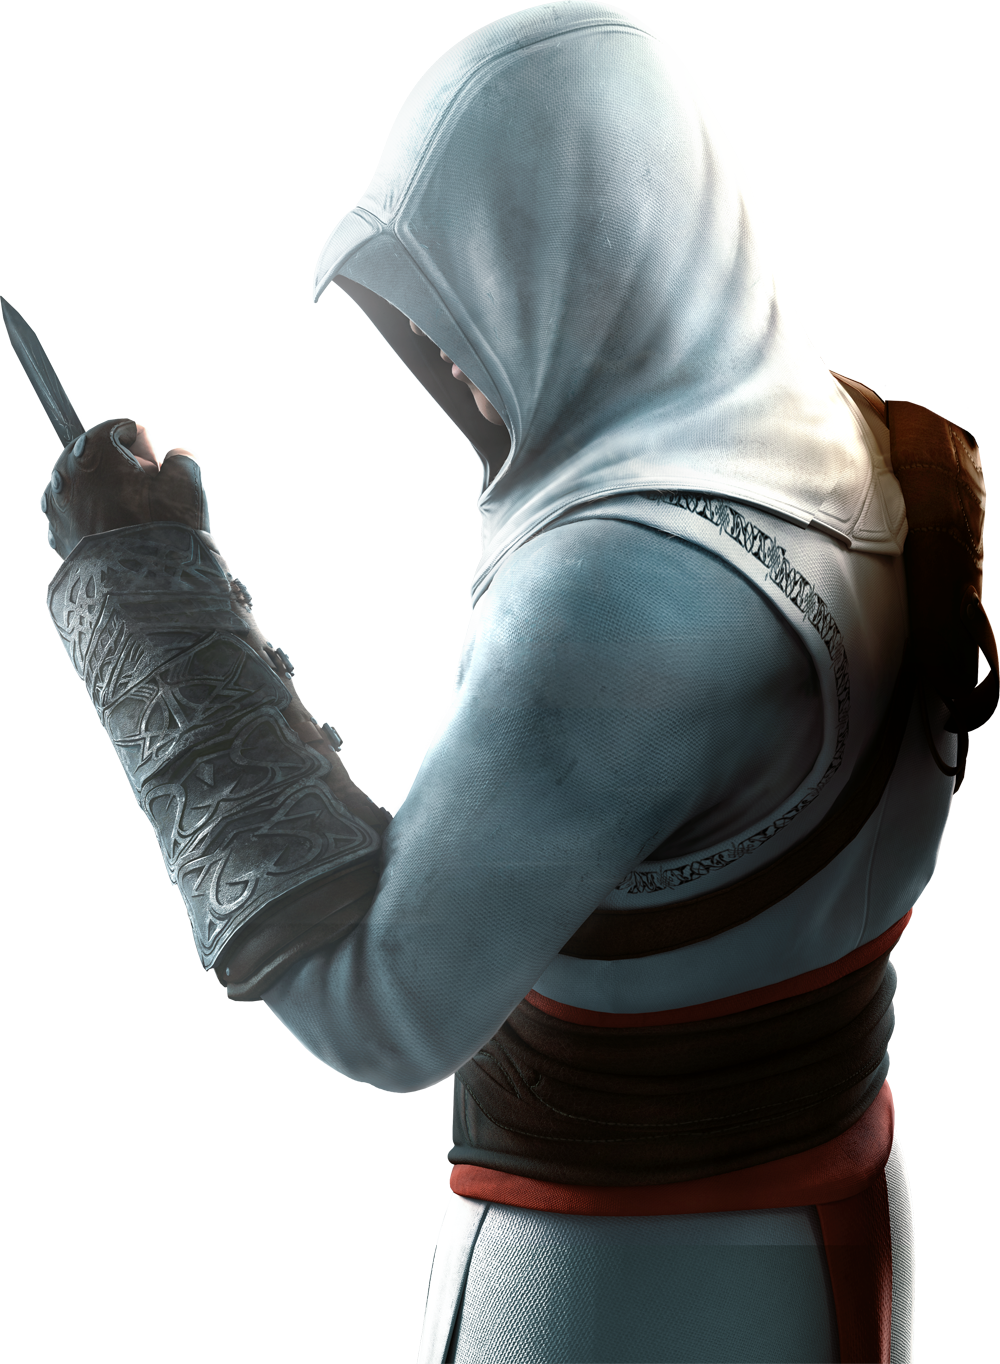 Altair Assassins Creed Image PNG Image